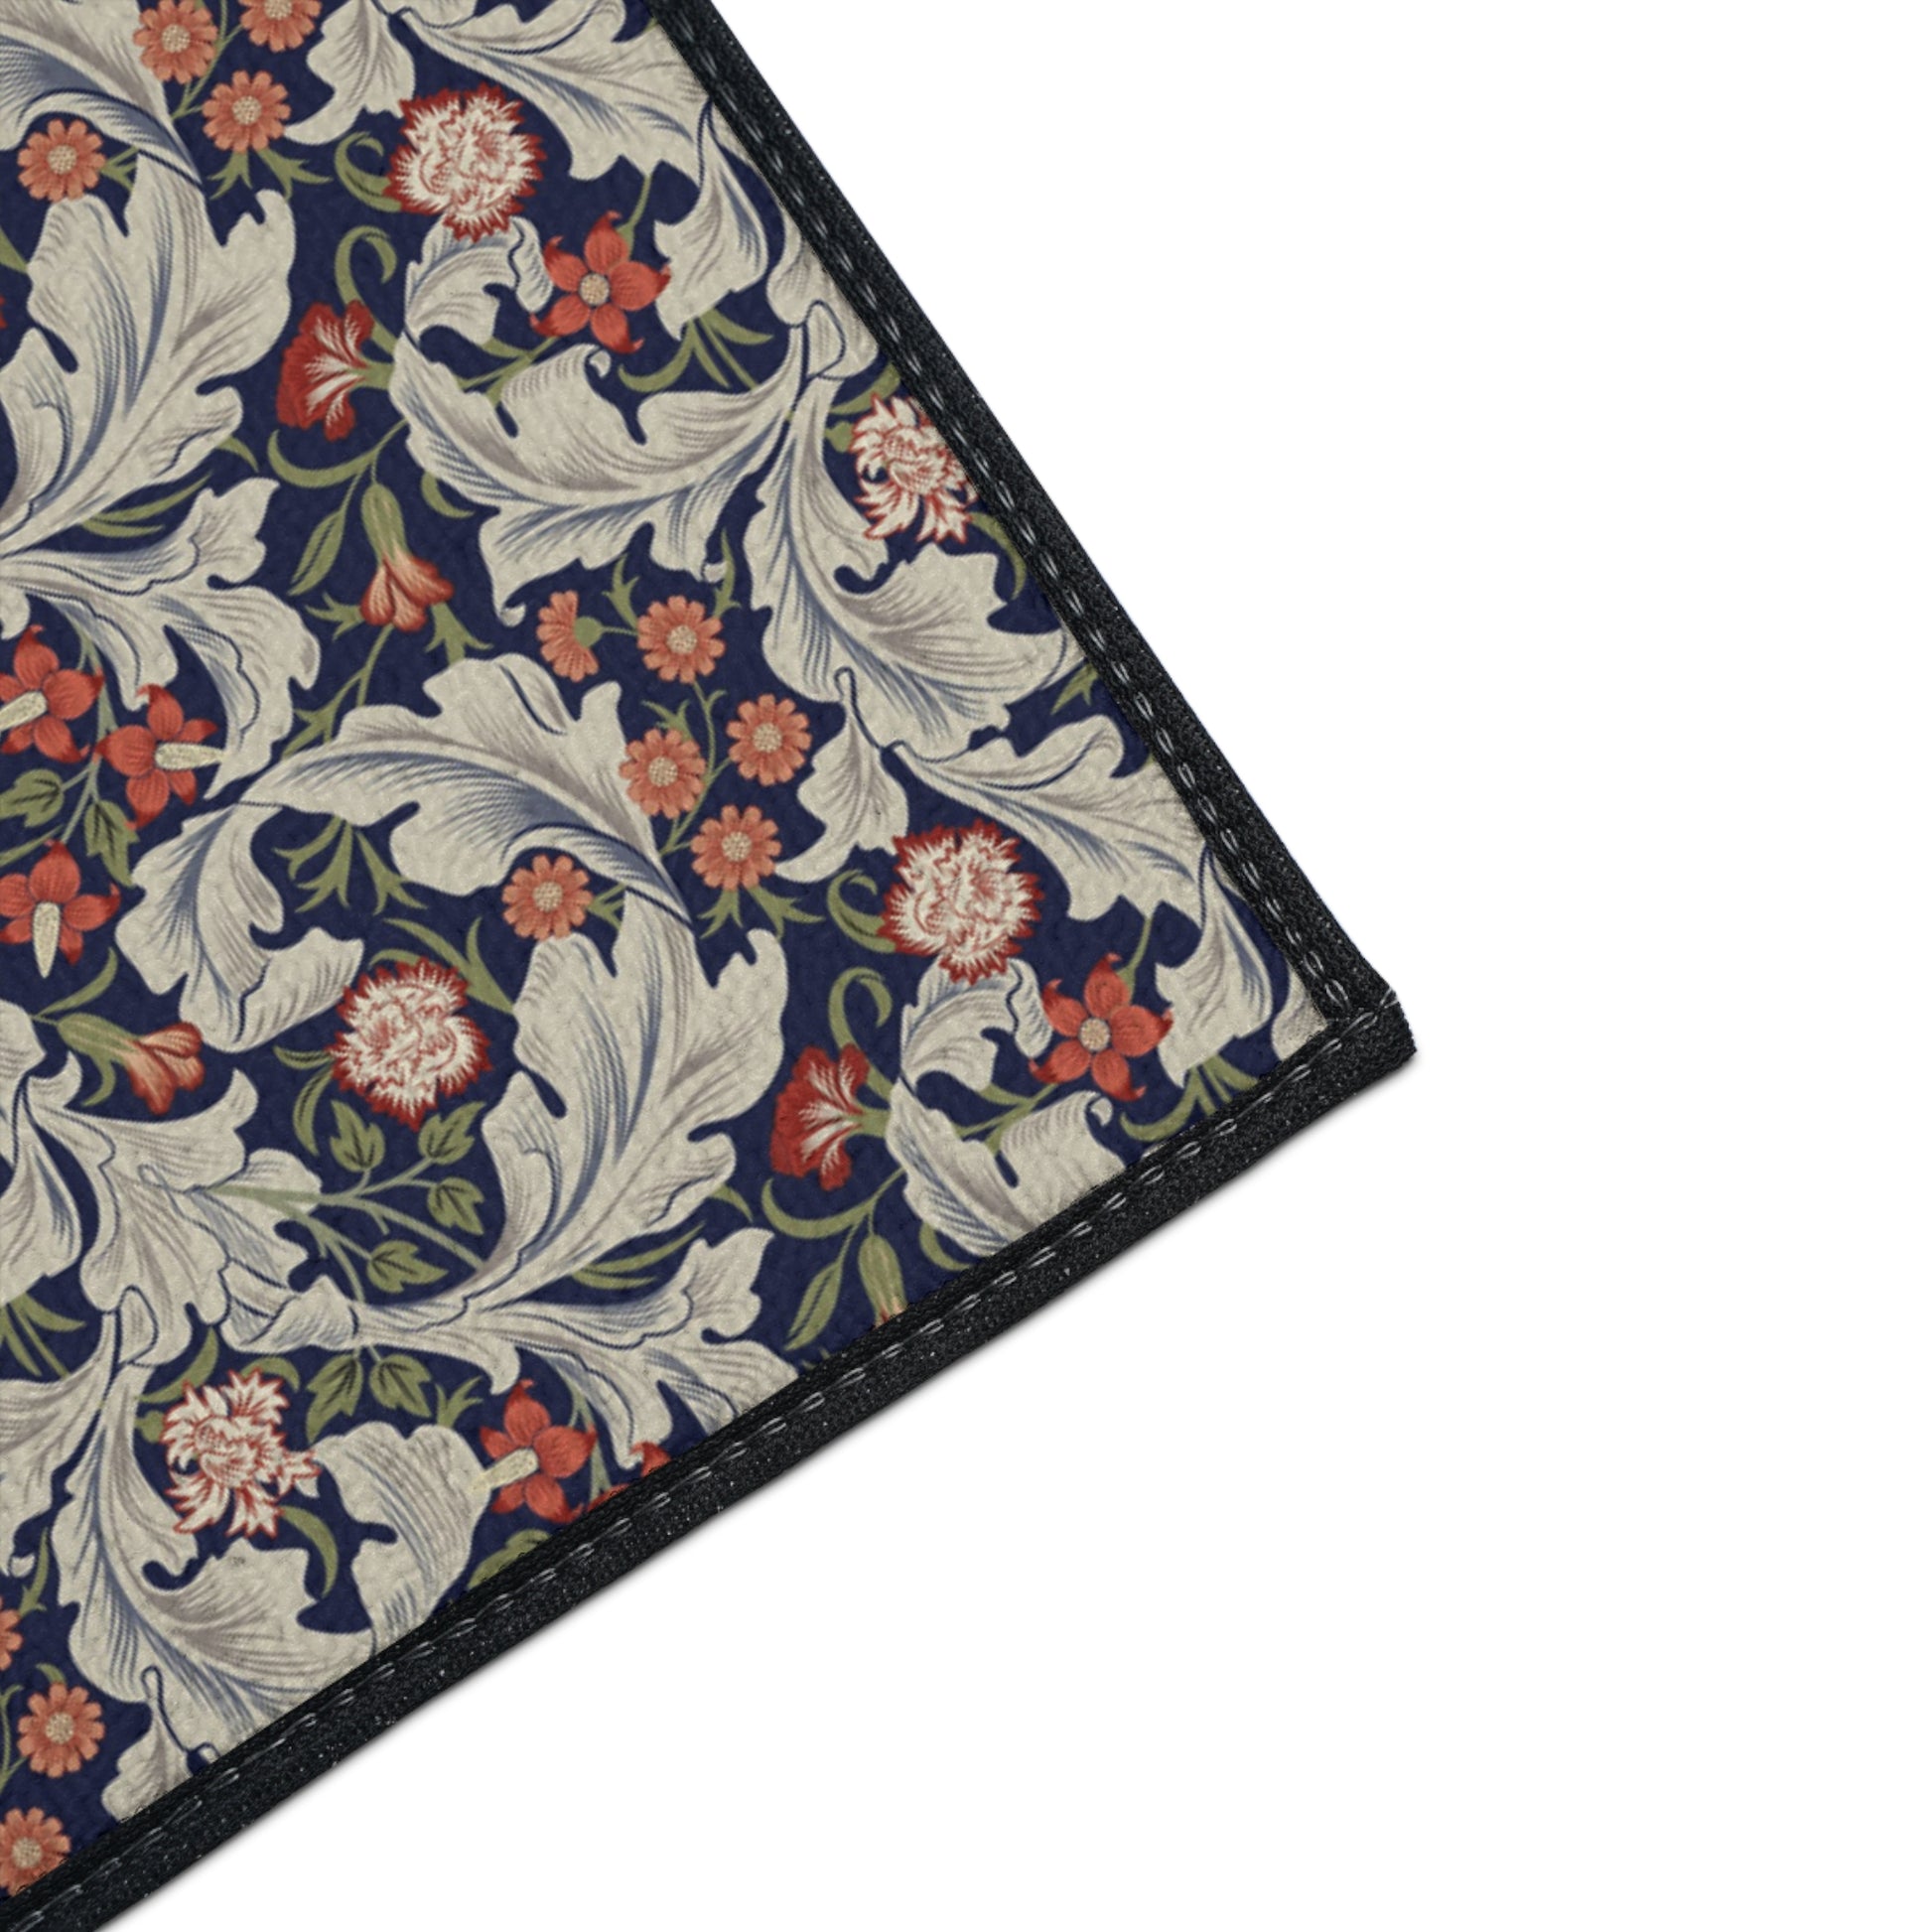 william-morris-co-heavy-duty-floor-mat-leicester-collection-royal-10